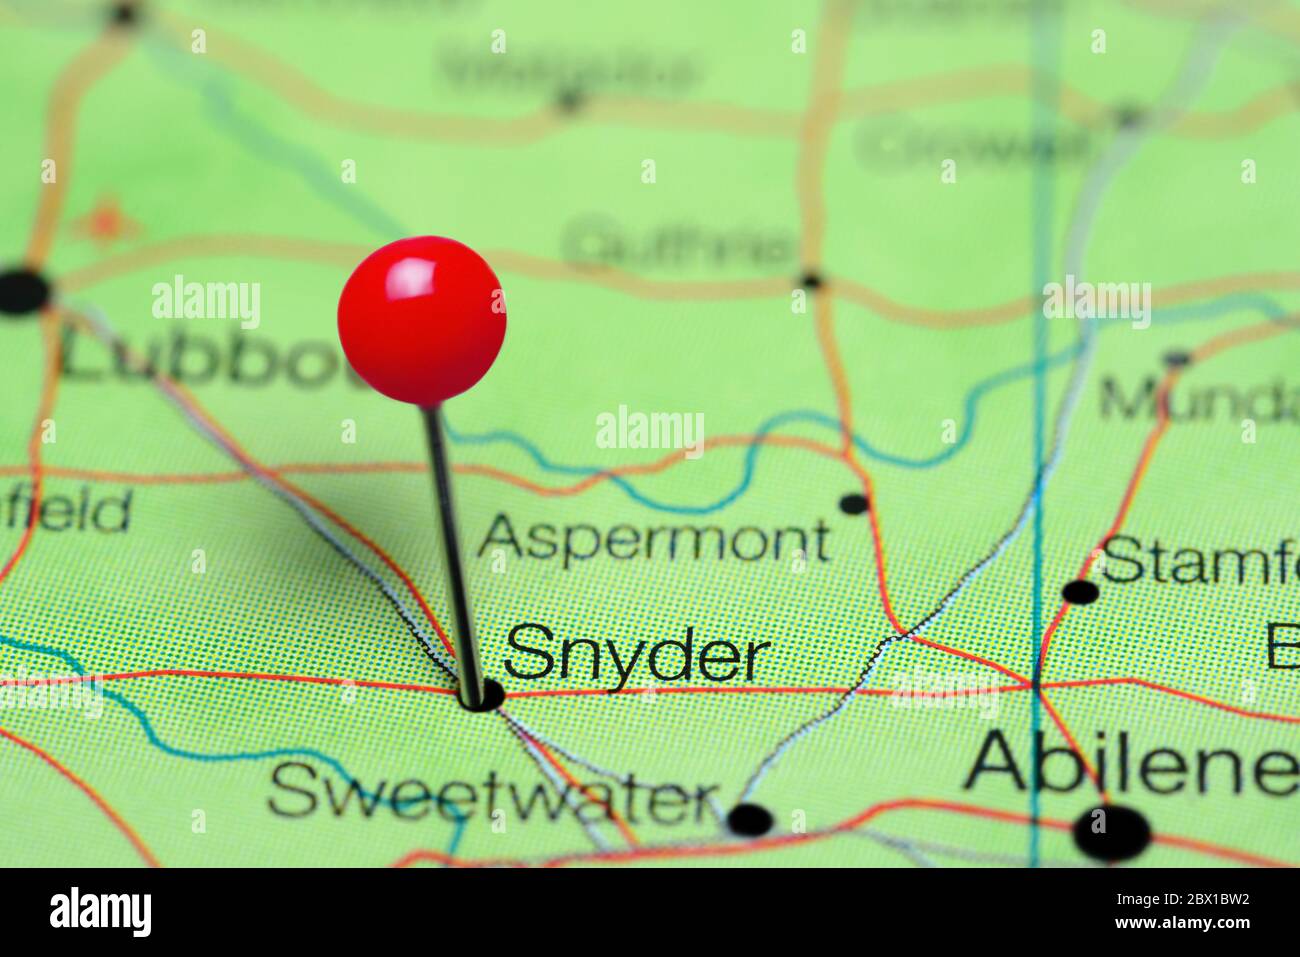 Snyder pinned on a map of Texas, USA Stock Photo